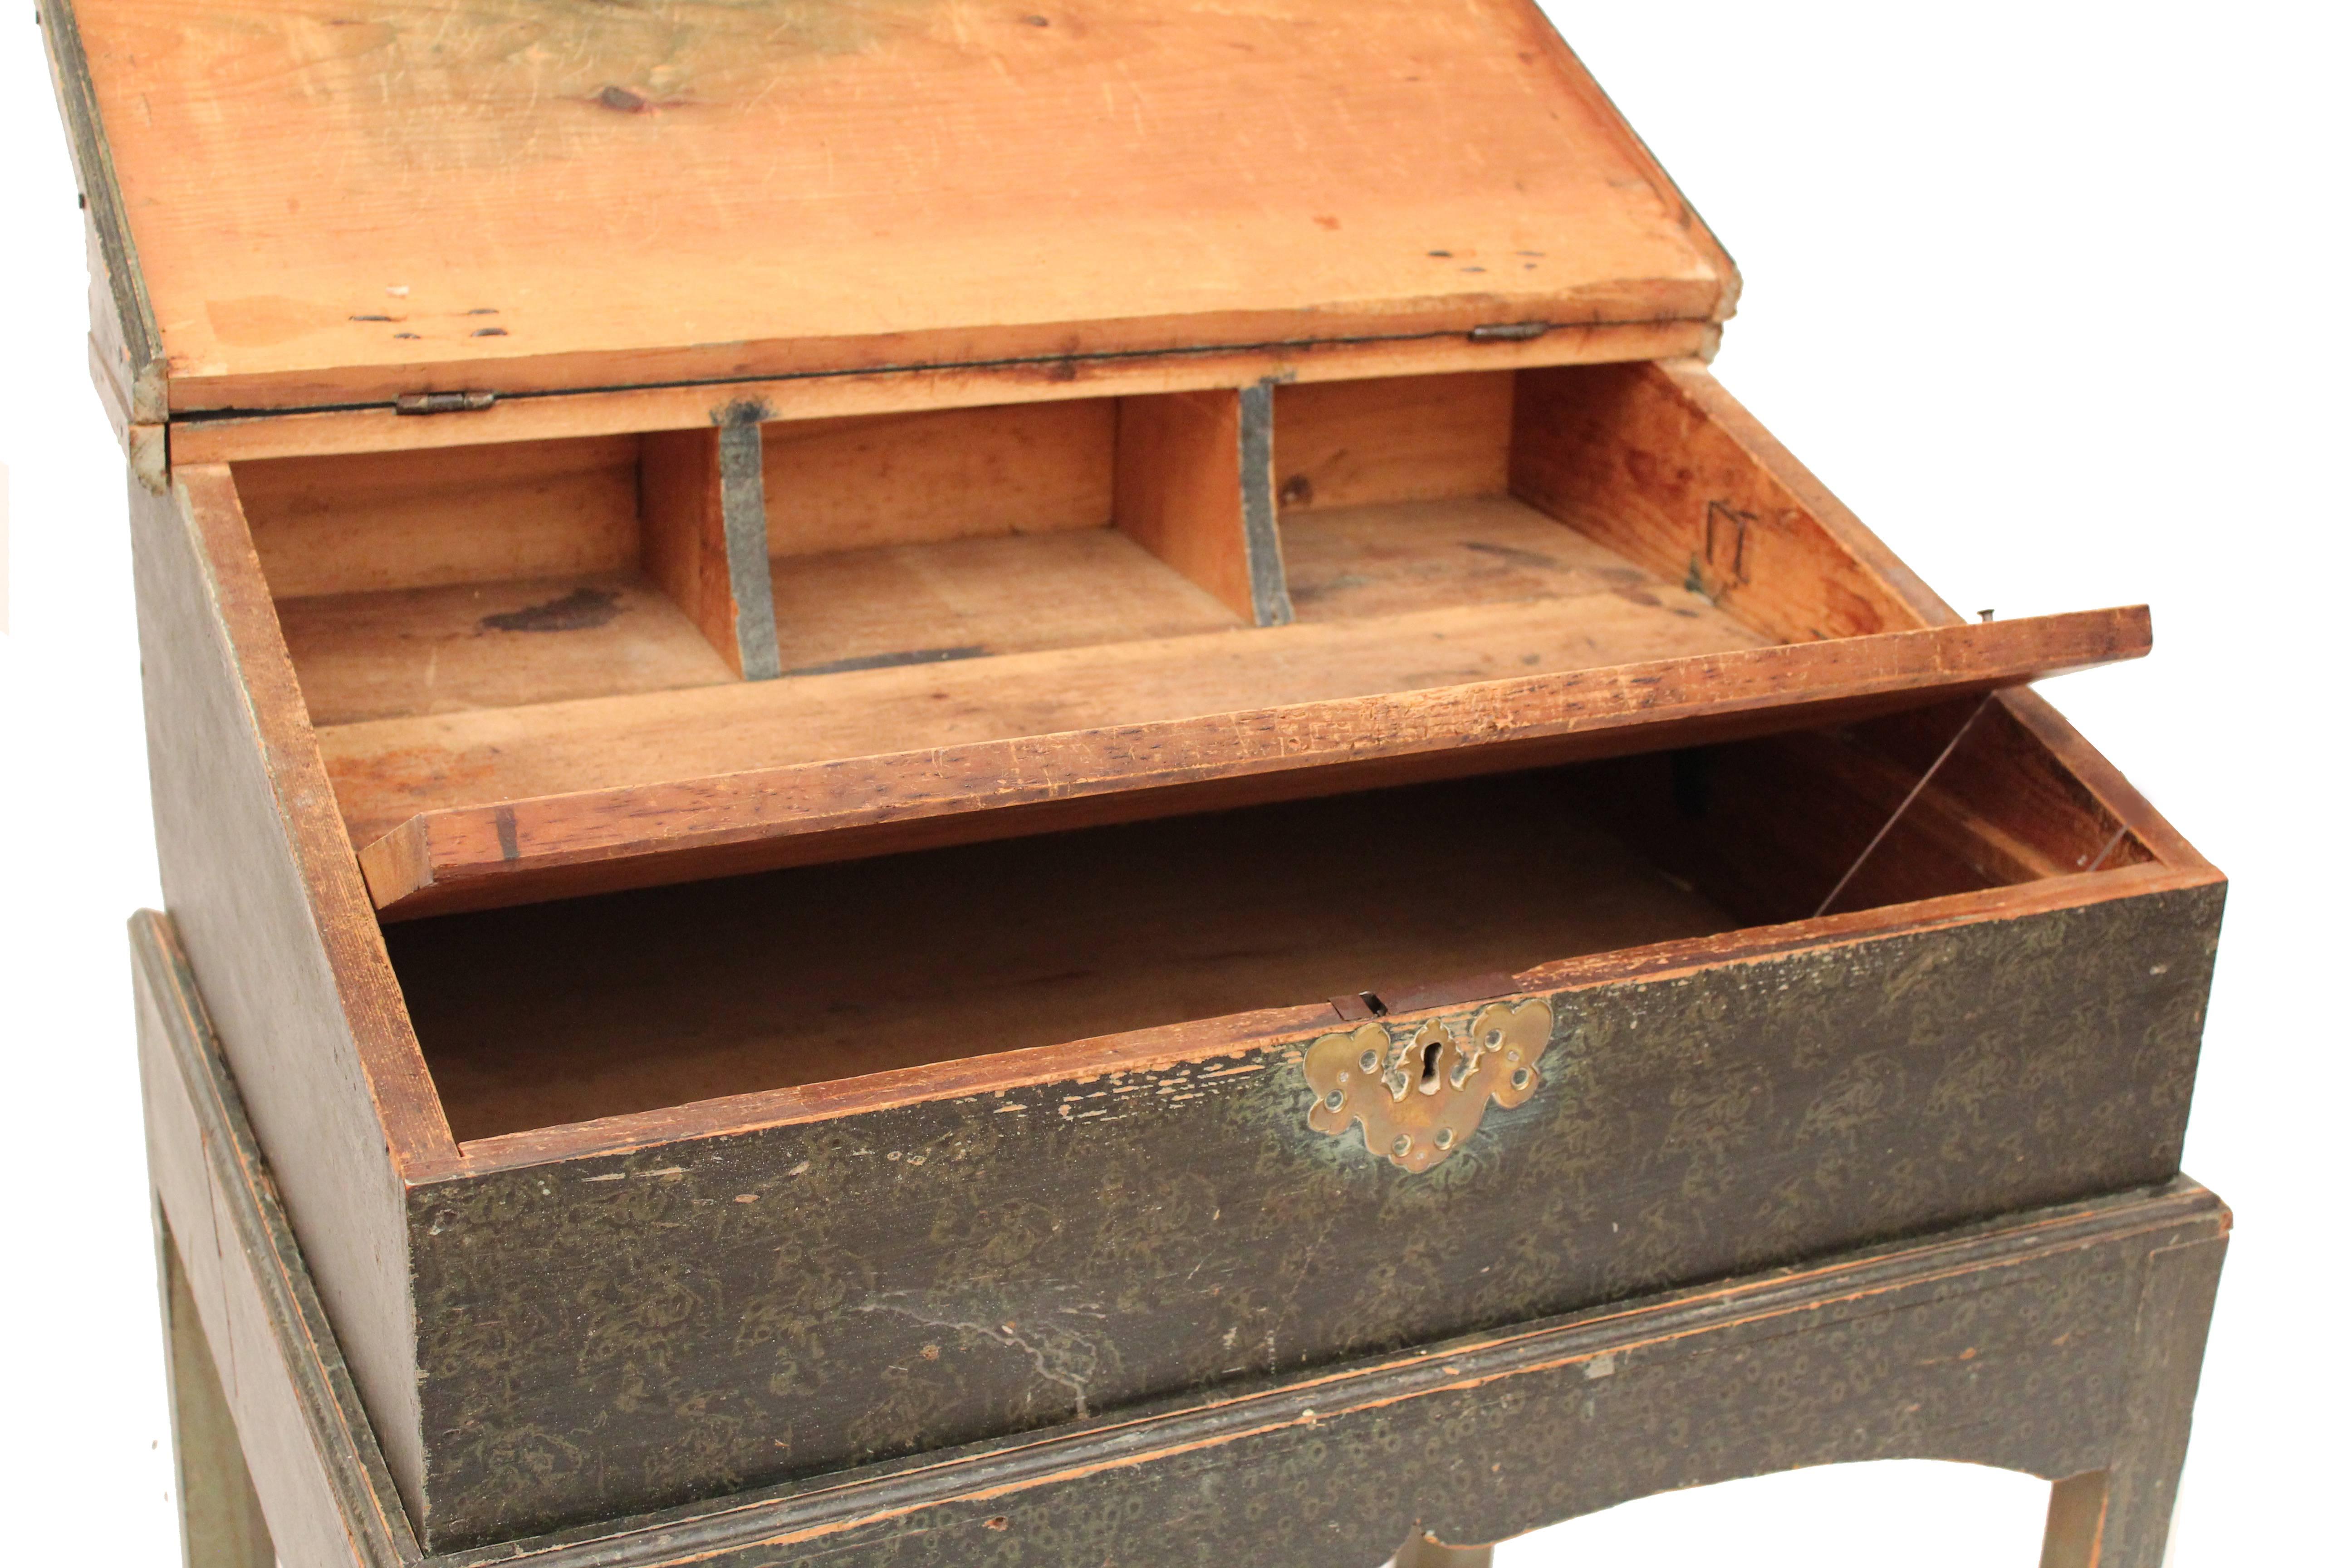 A pine New England desk on frame with original blue grained paint and iron butterfly hinges. It has a lift lid with four interior compartments, box stretchers and straight legs.